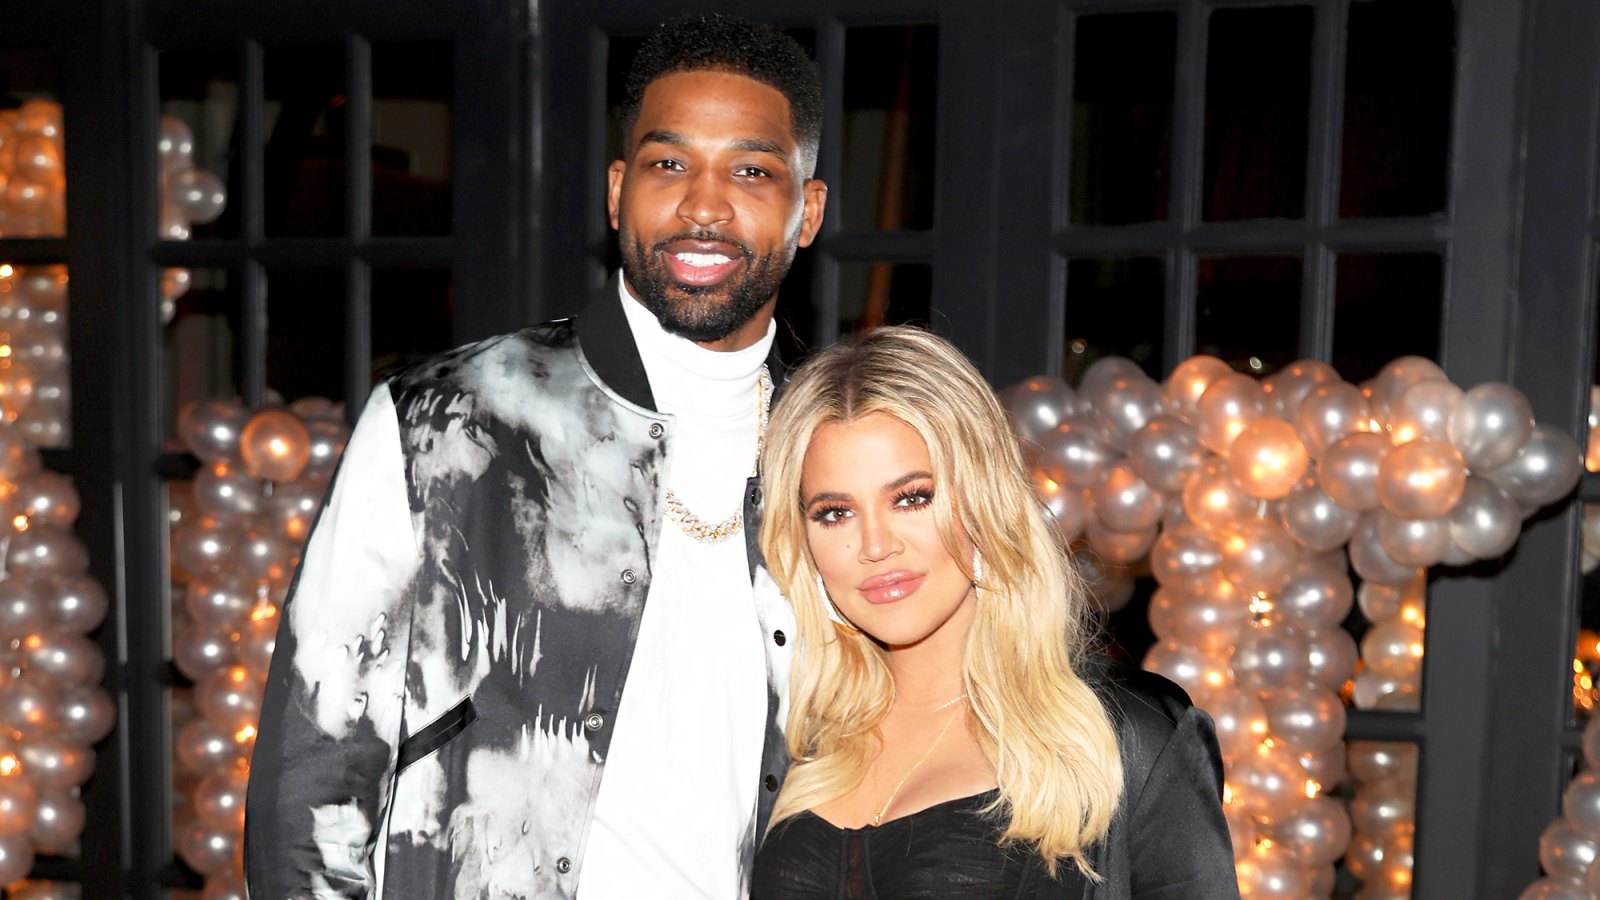 Tristan Thompson and Khloe Kardashian celebrate Tristan Thompson's Birthday at Beauty & Essex on March 10, 2018 in Los Angeles, California.